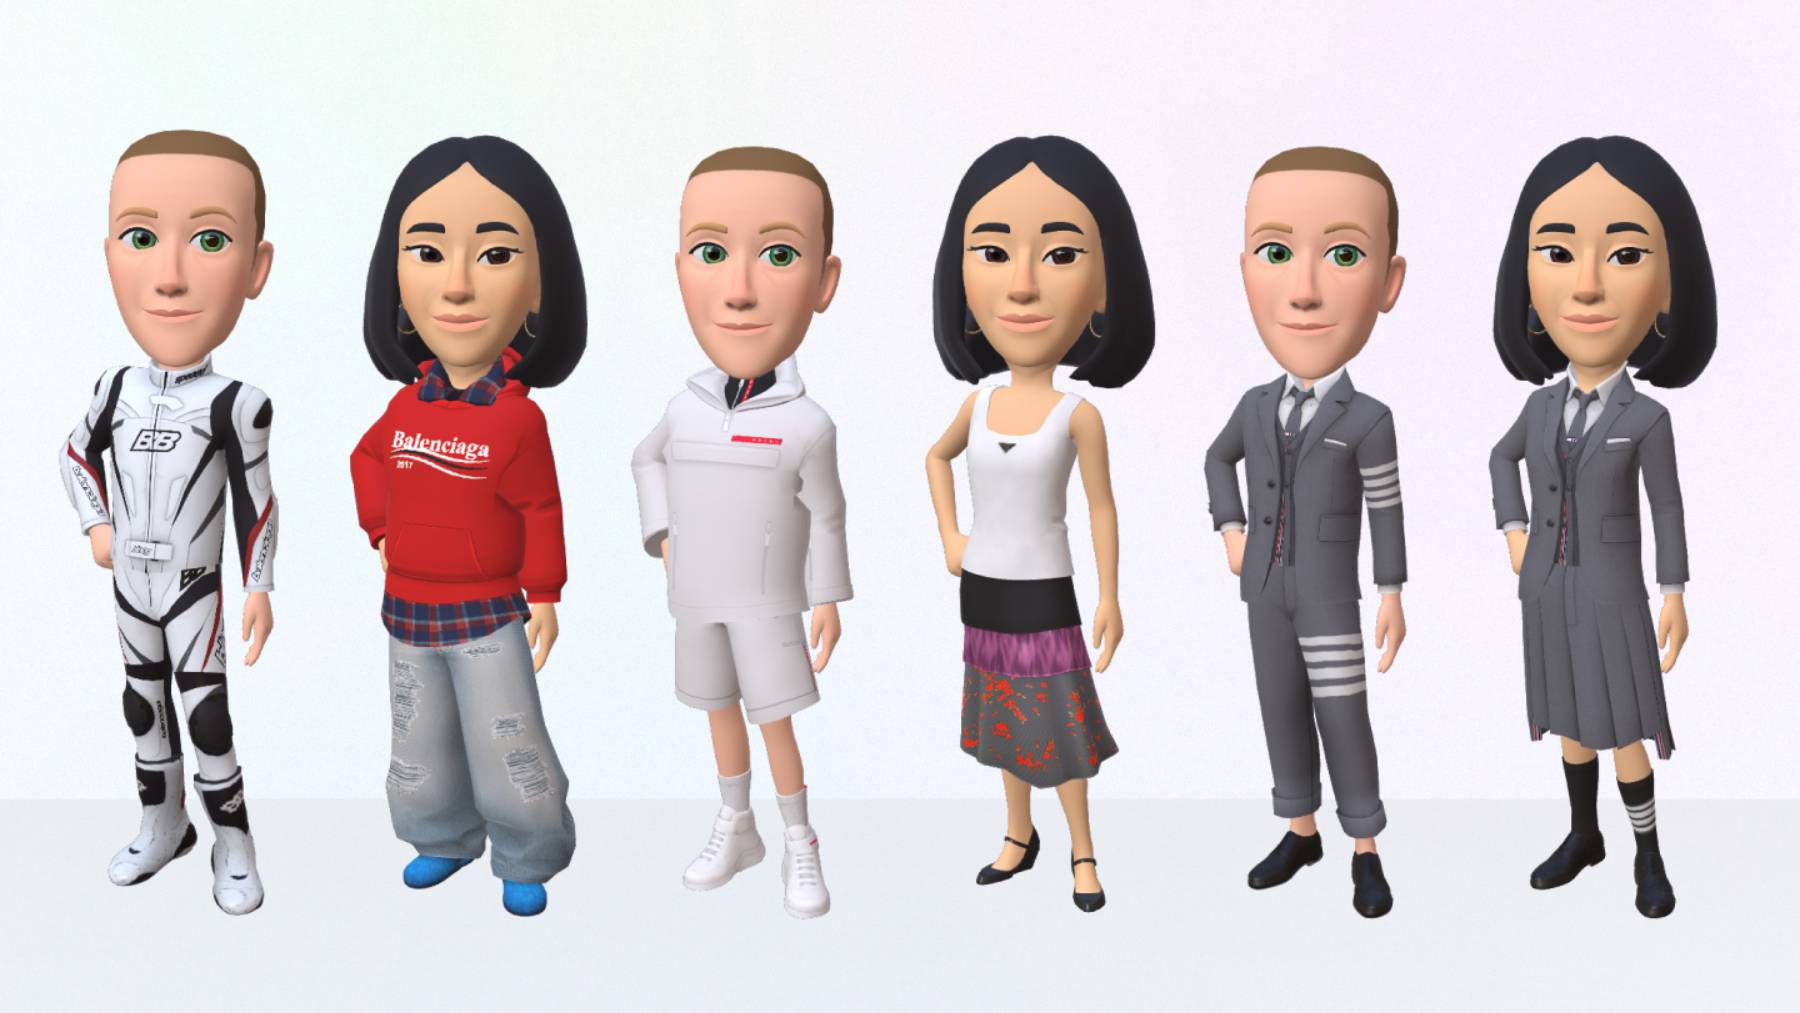 Cartoon avatars of Mark Zuckerberg and Eva Chen pose in different outfits including a baggie Balenciaga hoodie and jeans, a grey Thom Browne suit and a white anorak and shorts from Prada.